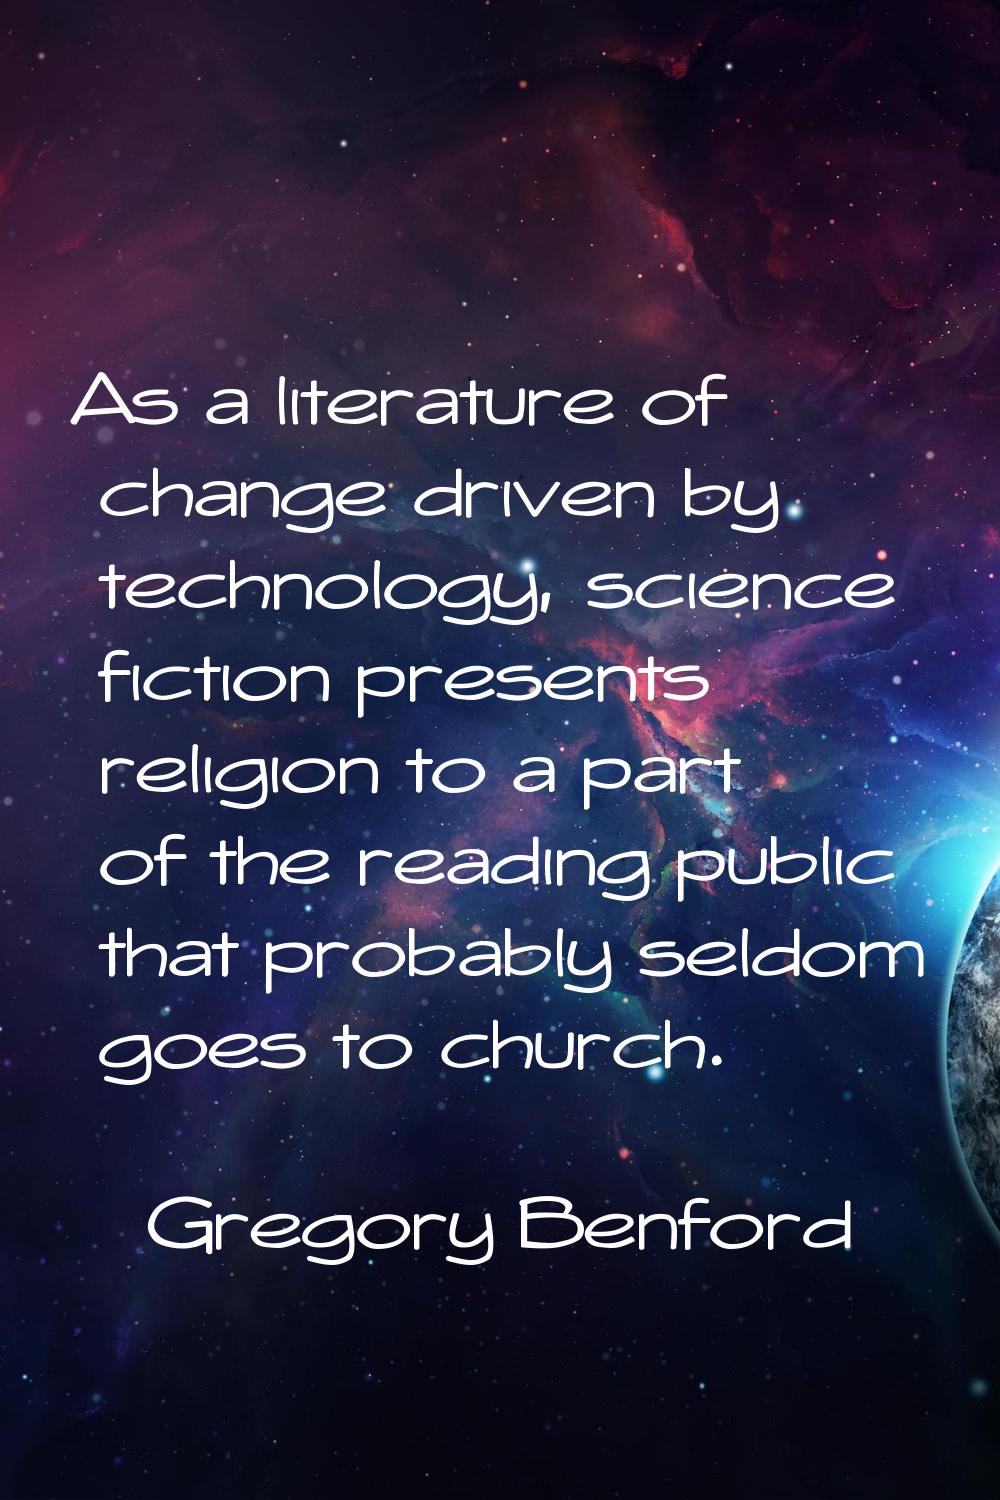 As a literature of change driven by technology, science fiction presents religion to a part of the 